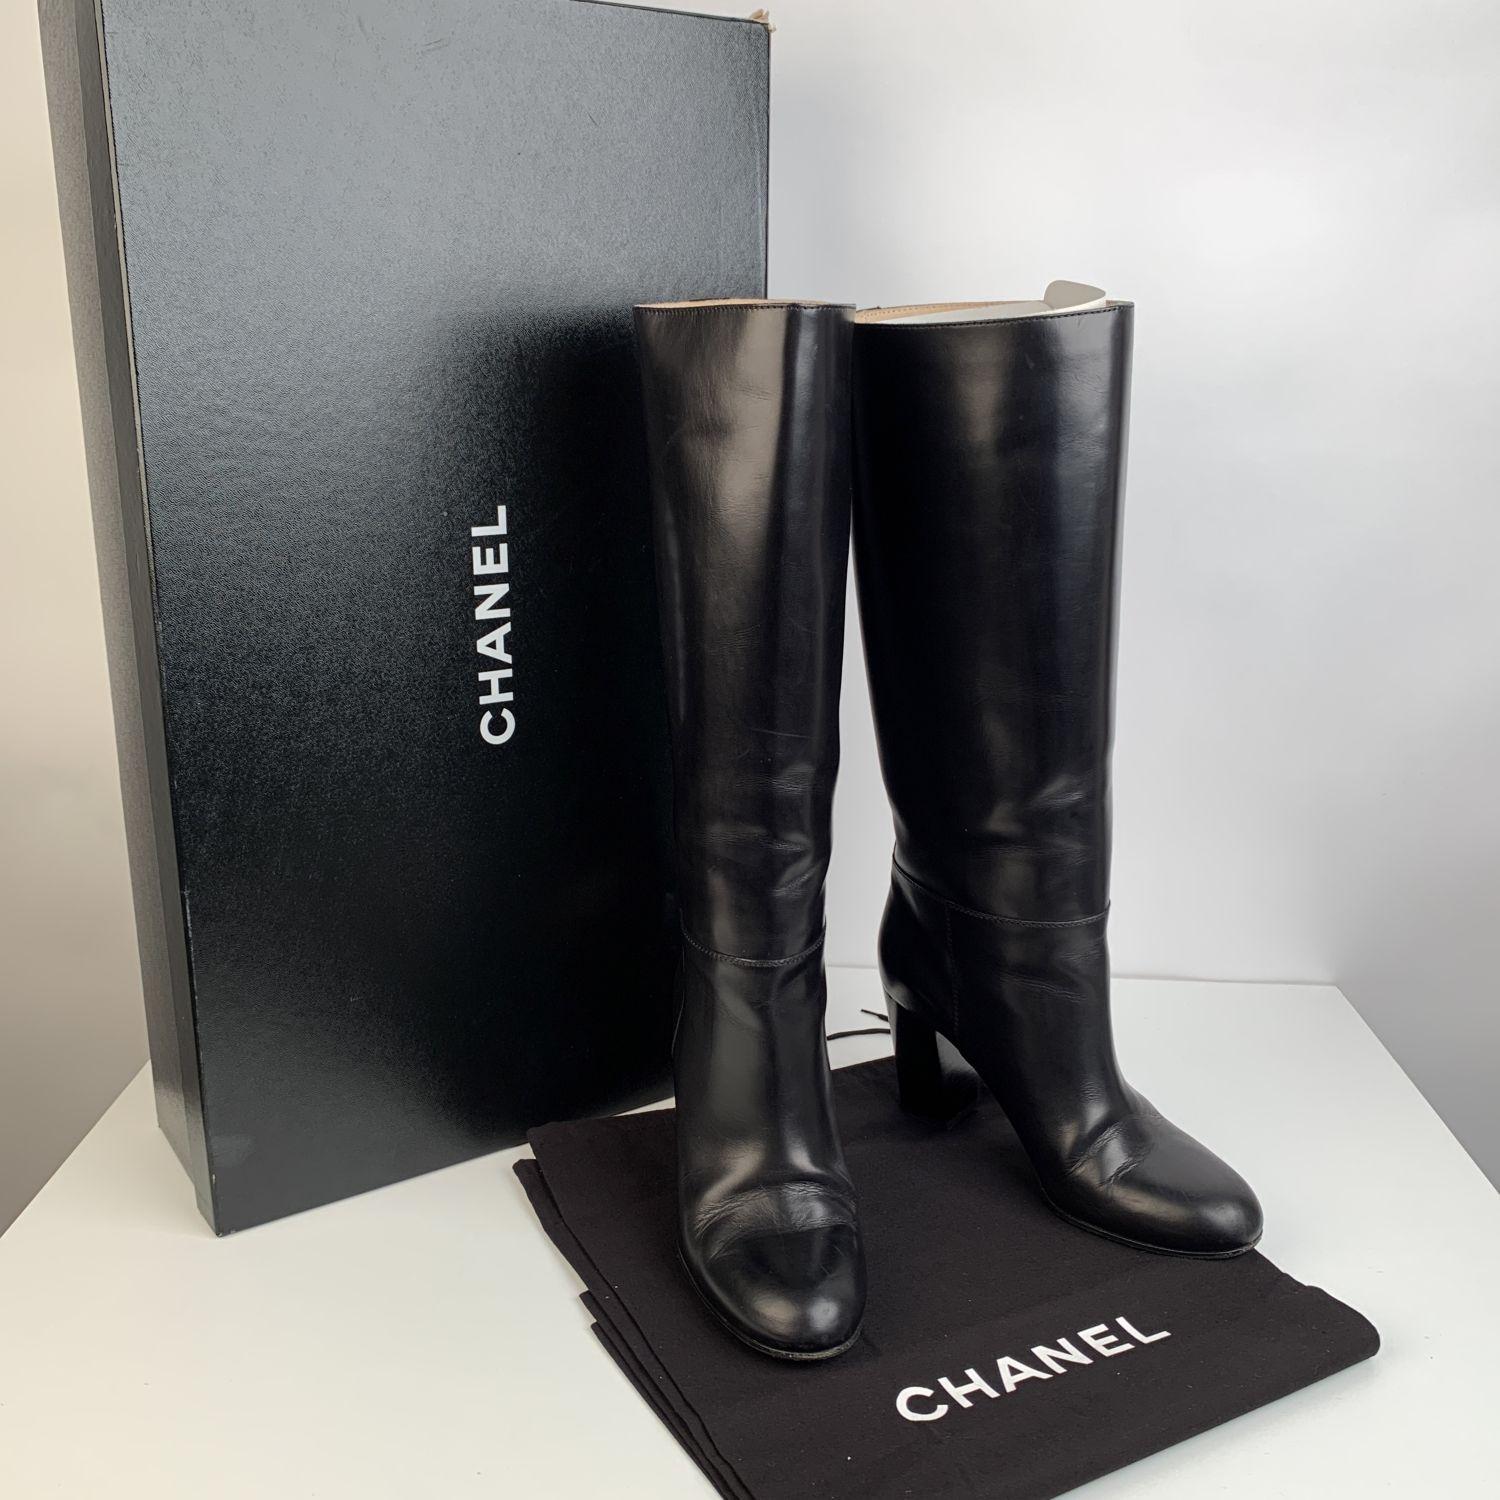 Chanel Knee high boots in black soft leather. Heels: 3.5 inches - 9 cm. Shaft height: 14 inches - 35,5. Calf circumference: 13 inches - 33 cm. Round toes. Pull on style. Small CC - CHANEL logo stitched on the exterior side. Size: 39 1/2 C (The size